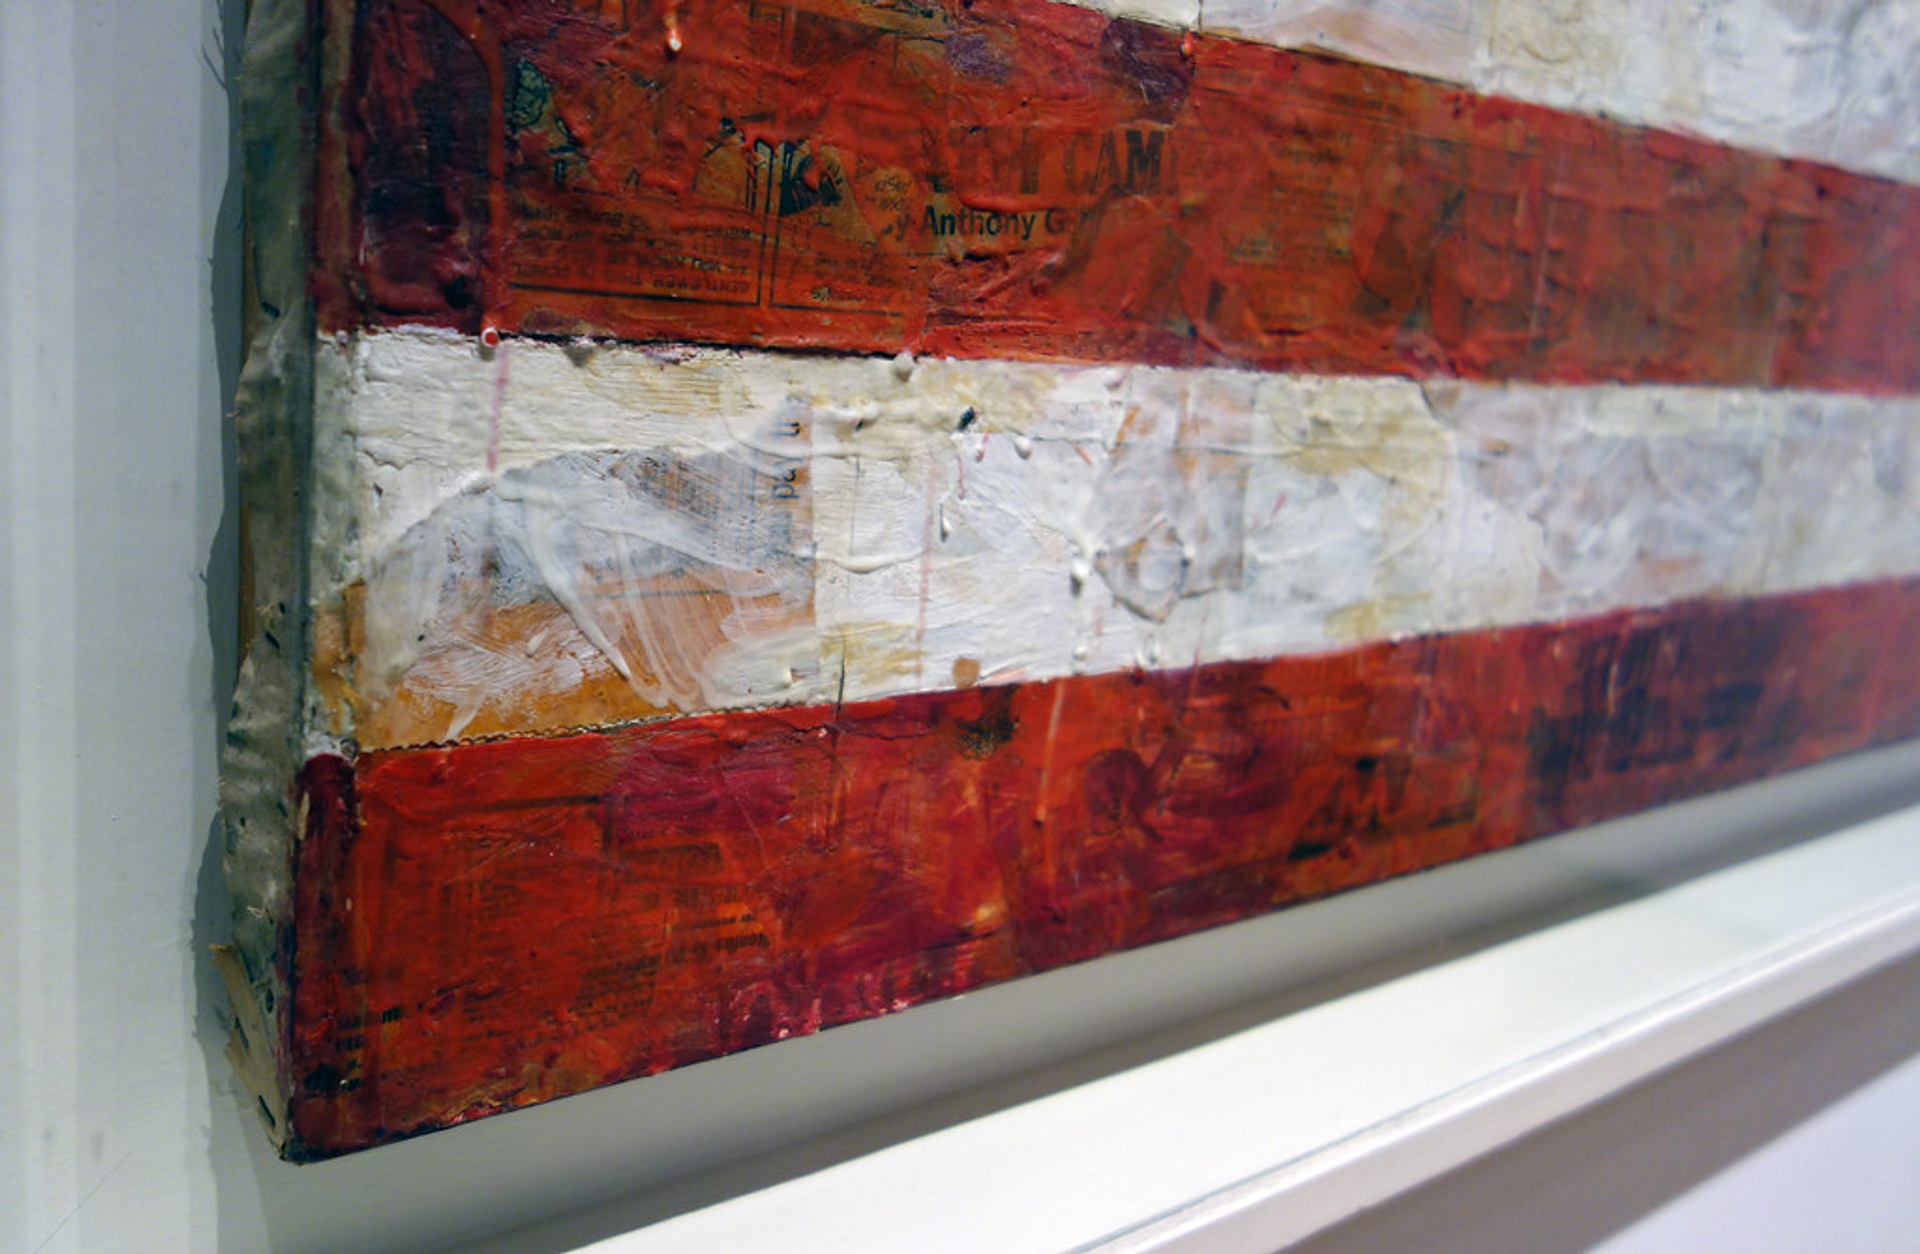 A close-up image of one of Jasper Johns' flags, showing the thick wax that adds texture to the canvas.